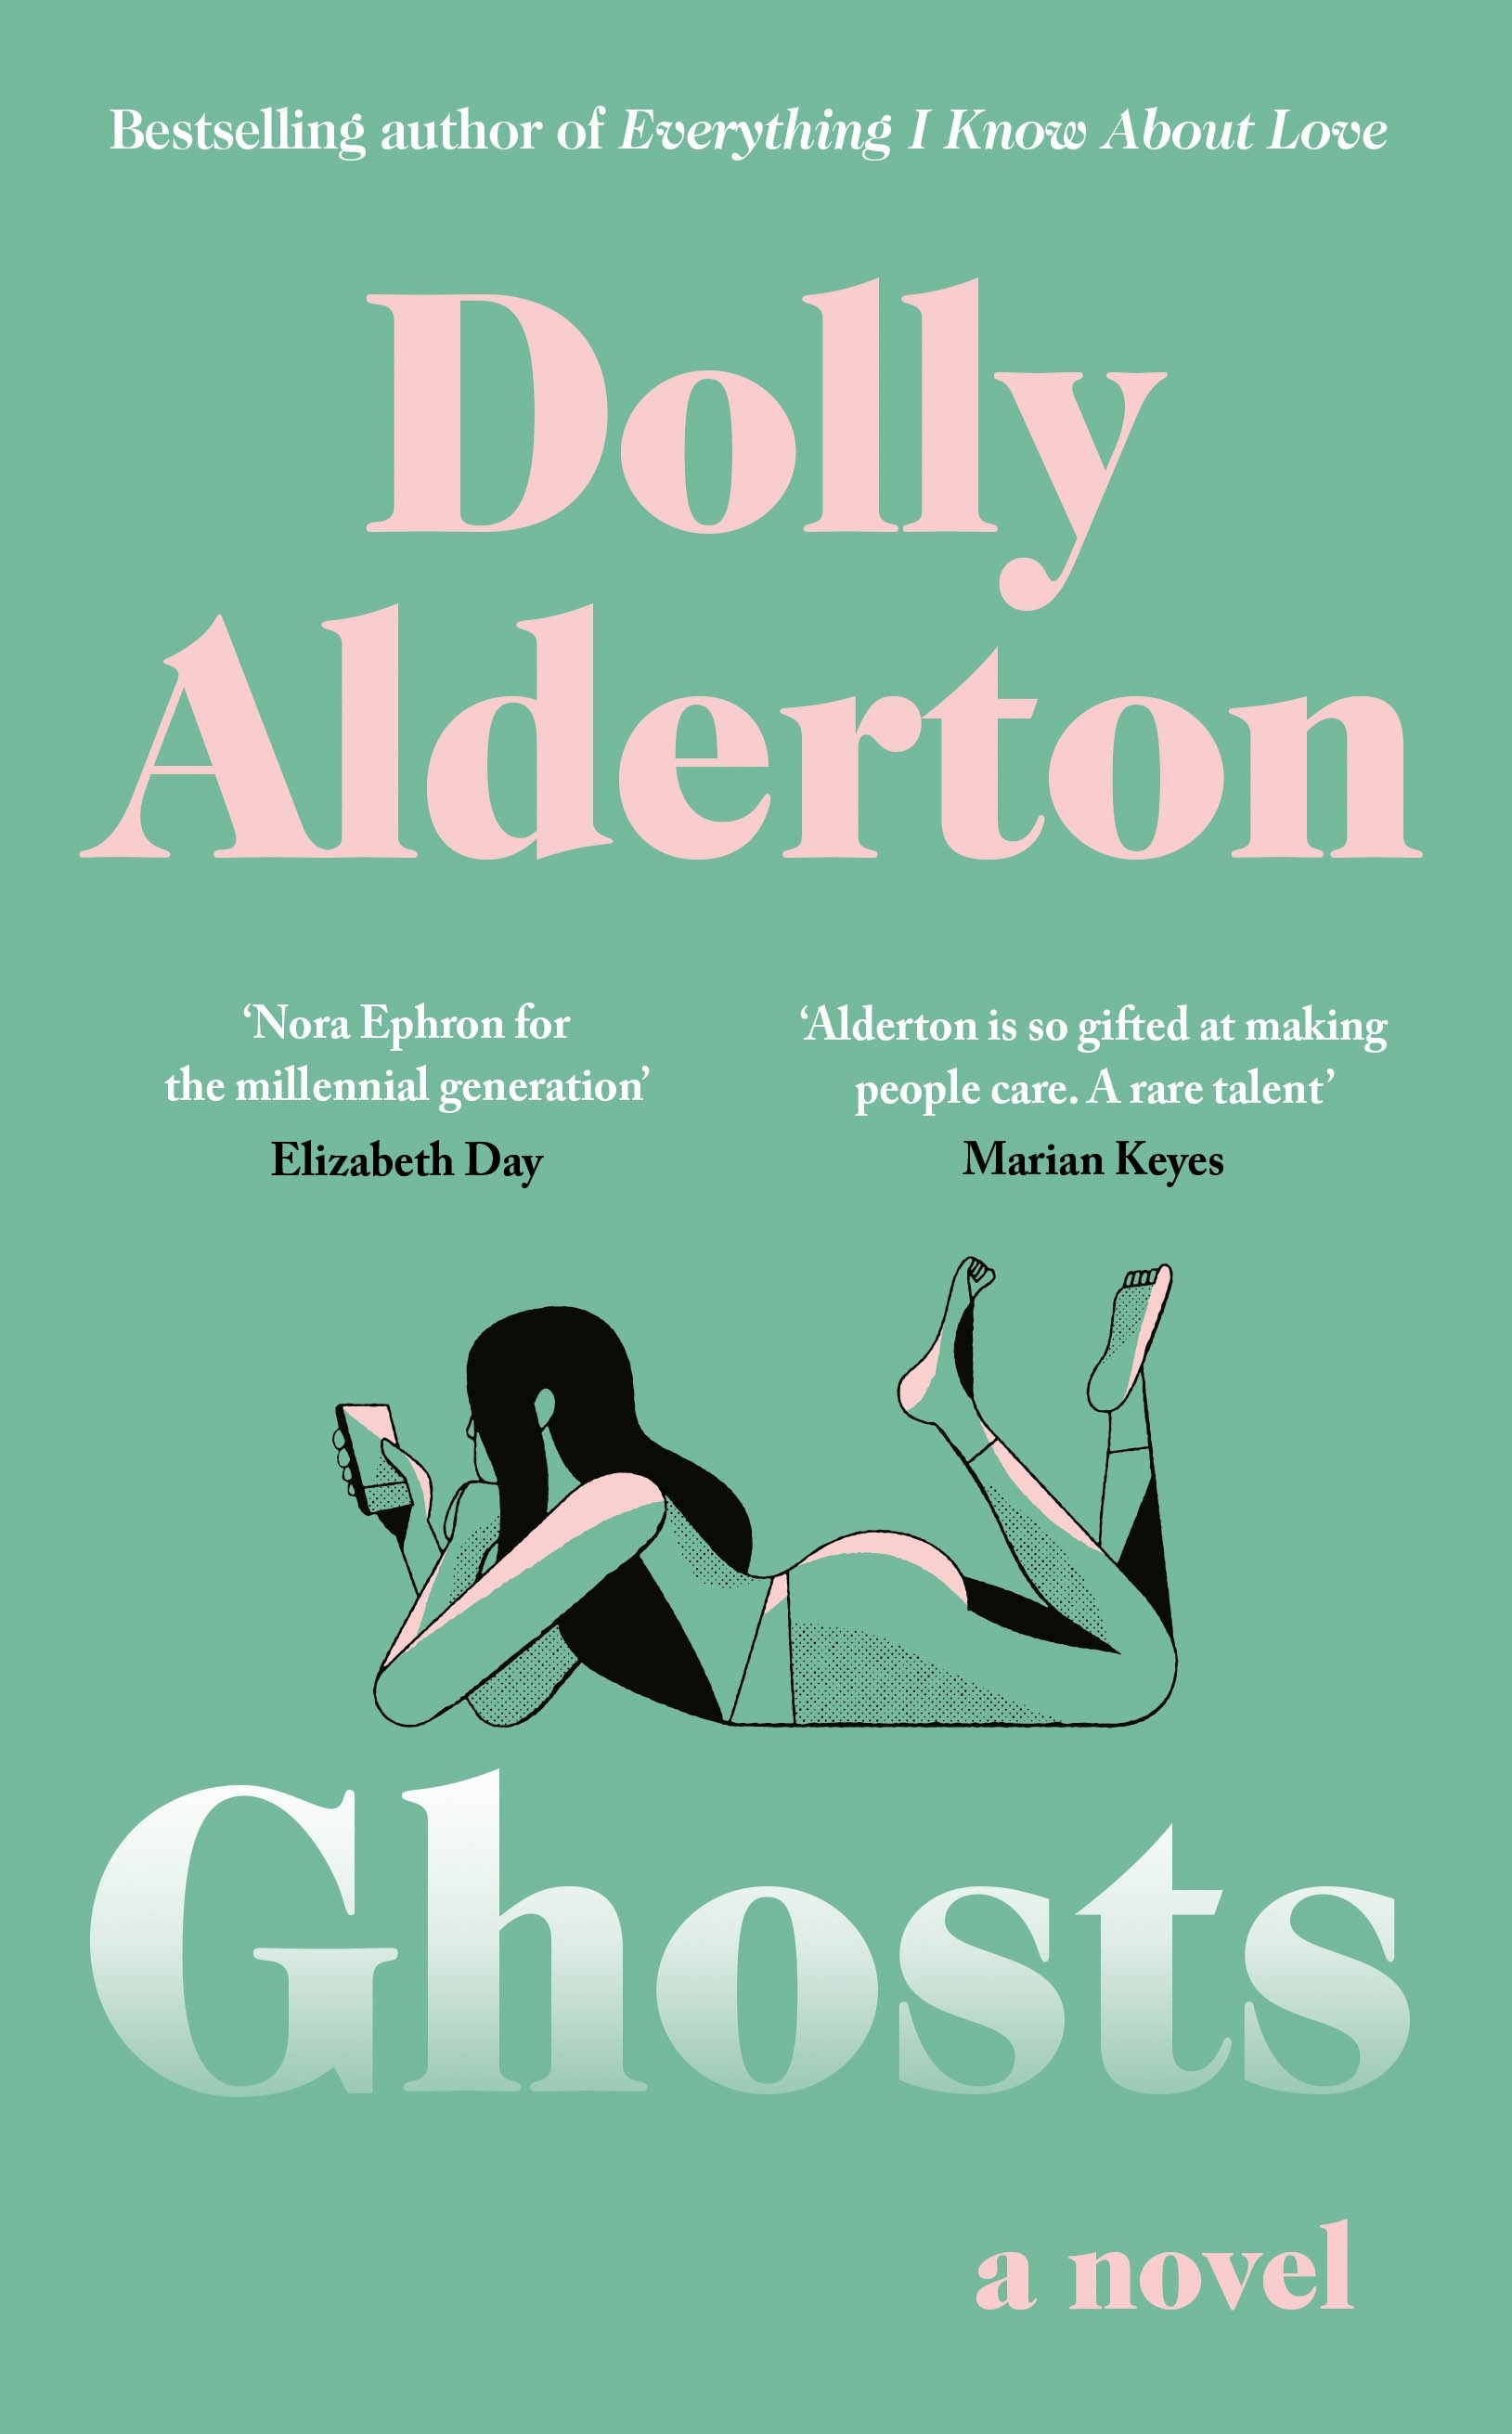 Book “Ghosts” by Dolly Alderton — October 15, 2020